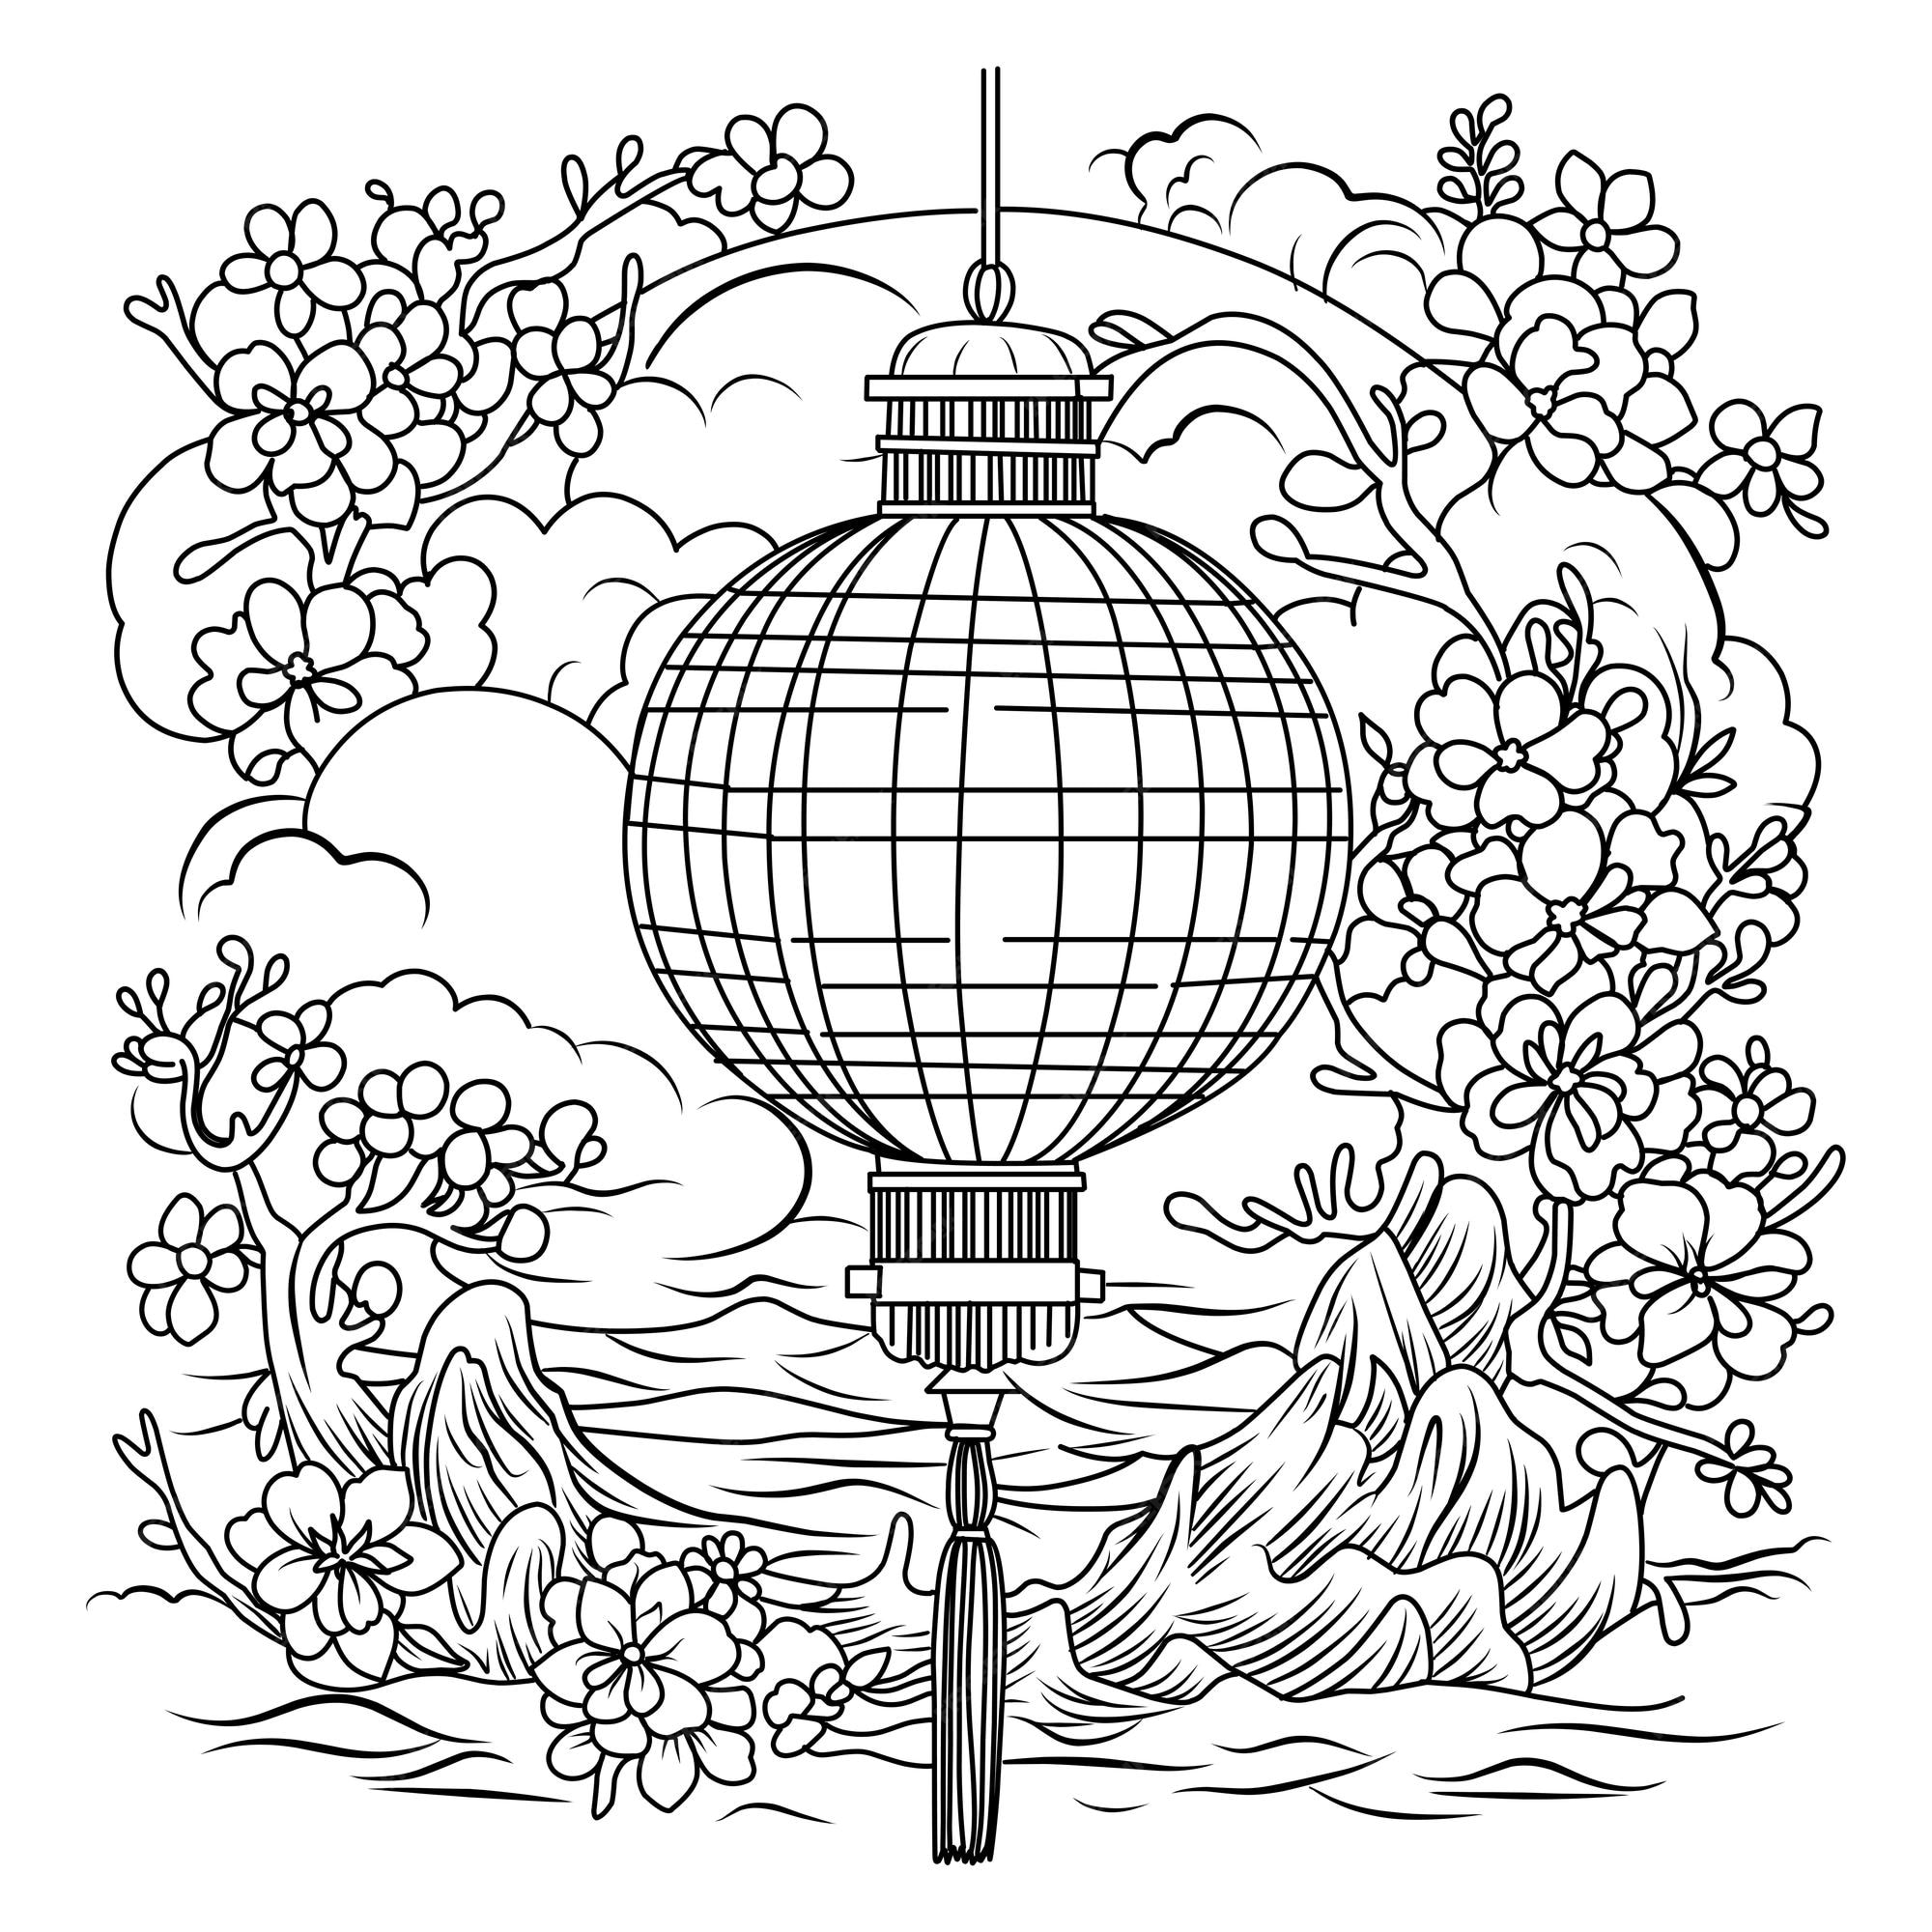 Premium vector toro nagashijapanese lantern festival coloring page coloring page of lanterns for the remembrance of the dead